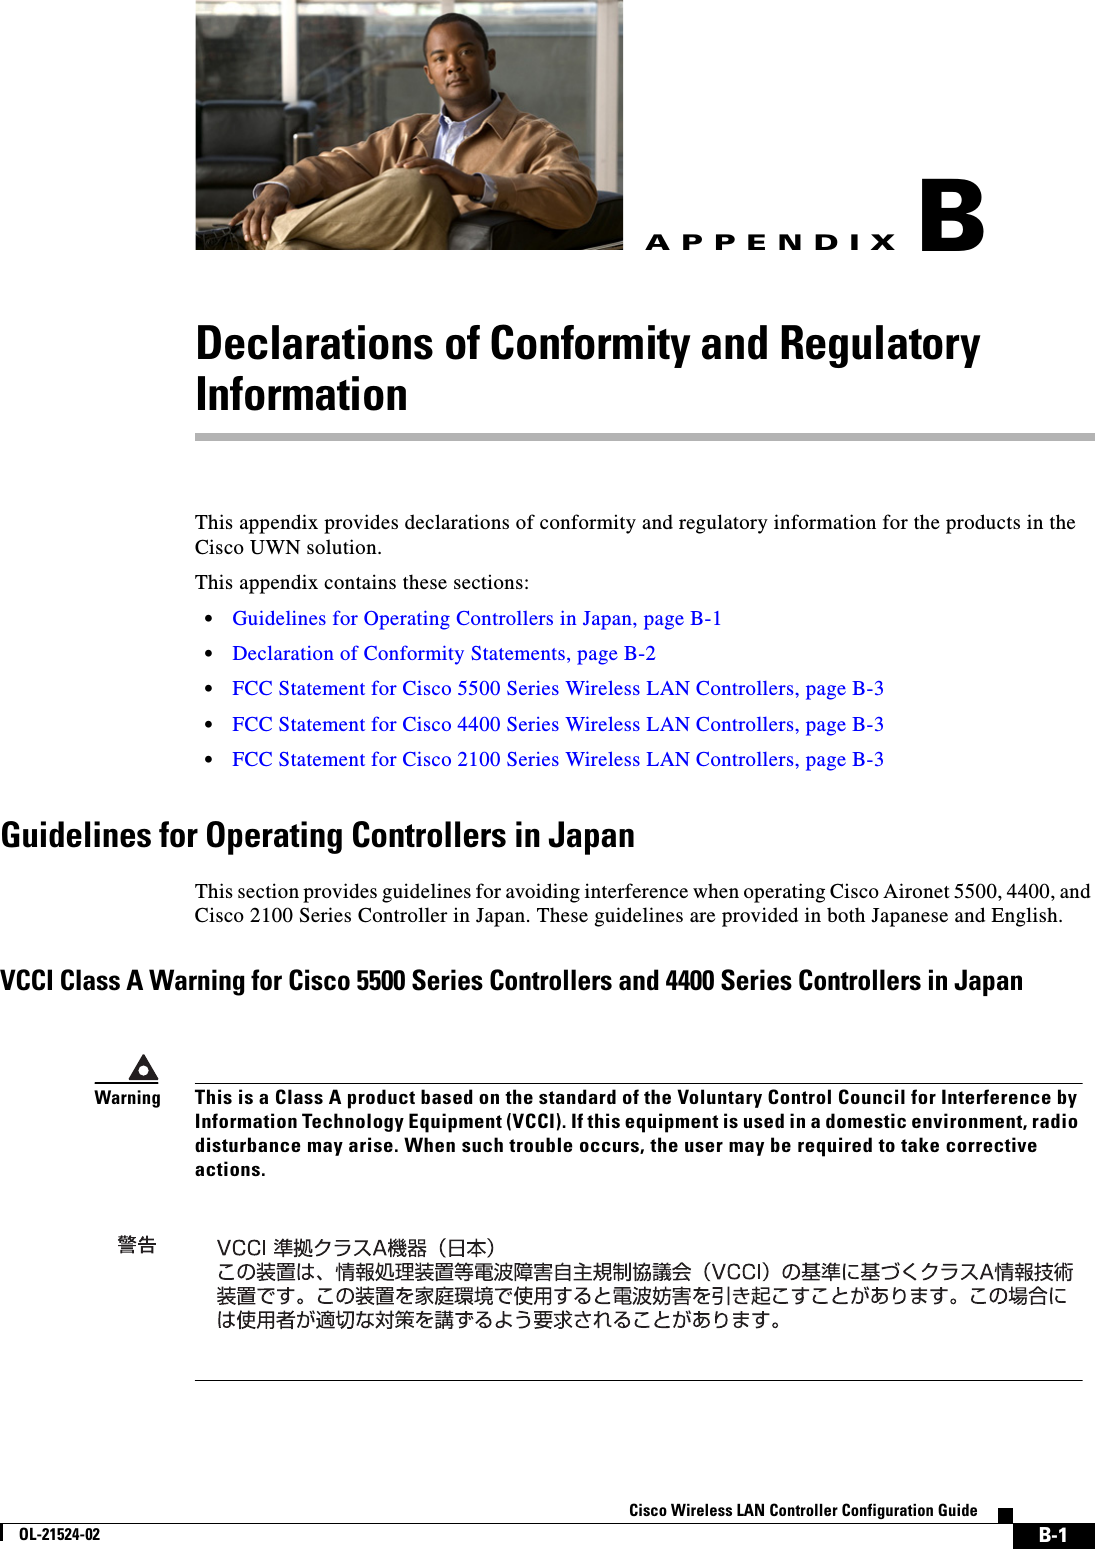  B-1Cisco Wireless LAN Controller Configuration GuideOL-21524-02APPENDIXBDeclarations of Conformity and Regulatory InformationThis appendix provides declarations of conformity and regulatory information for the products in the Cisco UWN solution. This appendix contains these sections:  • Guidelines for Operating Controllers in Japan, page B-1  • Declaration of Conformity Statements, page B-2  • FCC Statement for Cisco 5500 Series Wireless LAN Controllers, page B-3  • FCC Statement for Cisco 4400 Series Wireless LAN Controllers, page B-3  • FCC Statement for Cisco 2100 Series Wireless LAN Controllers, page B-3Guidelines for Operating Controllers in JapanThis section provides guidelines for avoiding interference when operating Cisco Aironet 5500, 4400, and Cisco 2100 Series Controller in Japan. These guidelines are provided in both Japanese and English.VCCI Class A Warning for Cisco 5500 Series Controllers and 4400 Series Controllers in JapanWarningThis is a Class A product based on the standard of the Voluntary Control Council for Interference by Information Technology Equipment (VCCI). If this equipment is used in a domestic environment, radio disturbance may arise. When such trouble occurs, the user may be required to take corrective actions. 